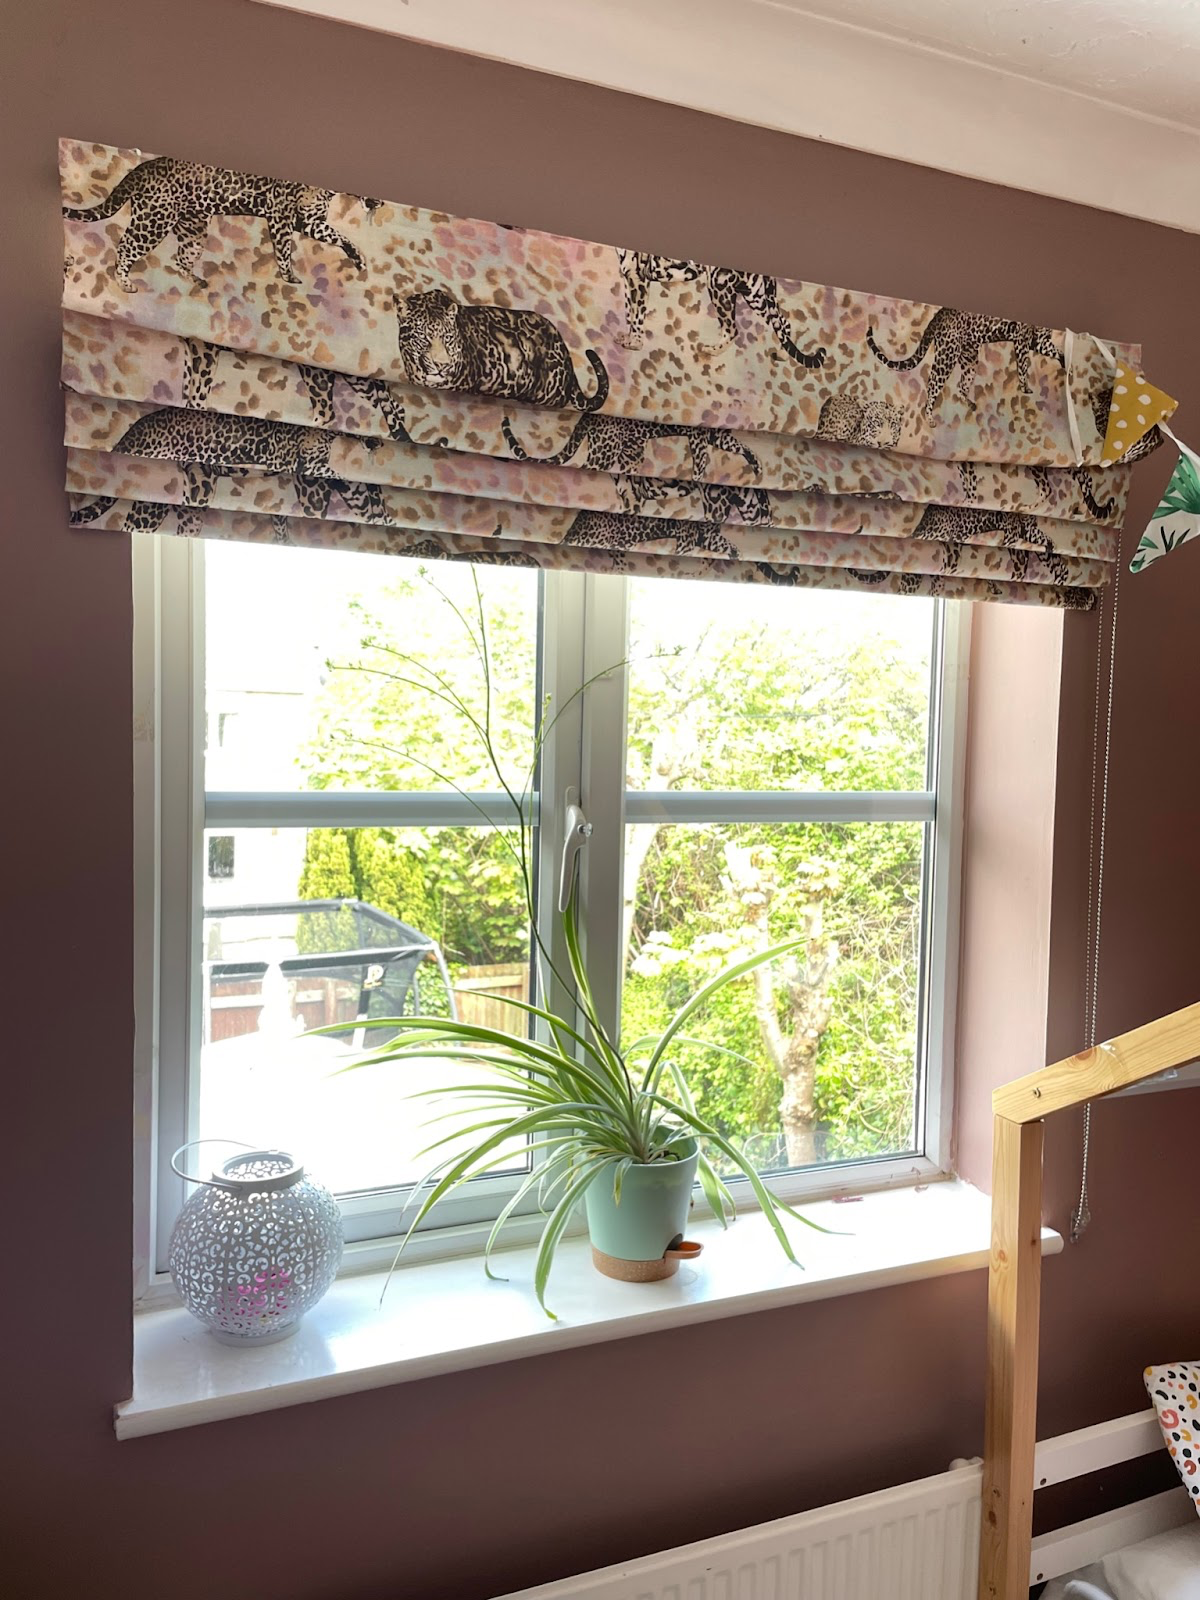 A pink and beige roman blinds with a leopard design on a leopard print background.